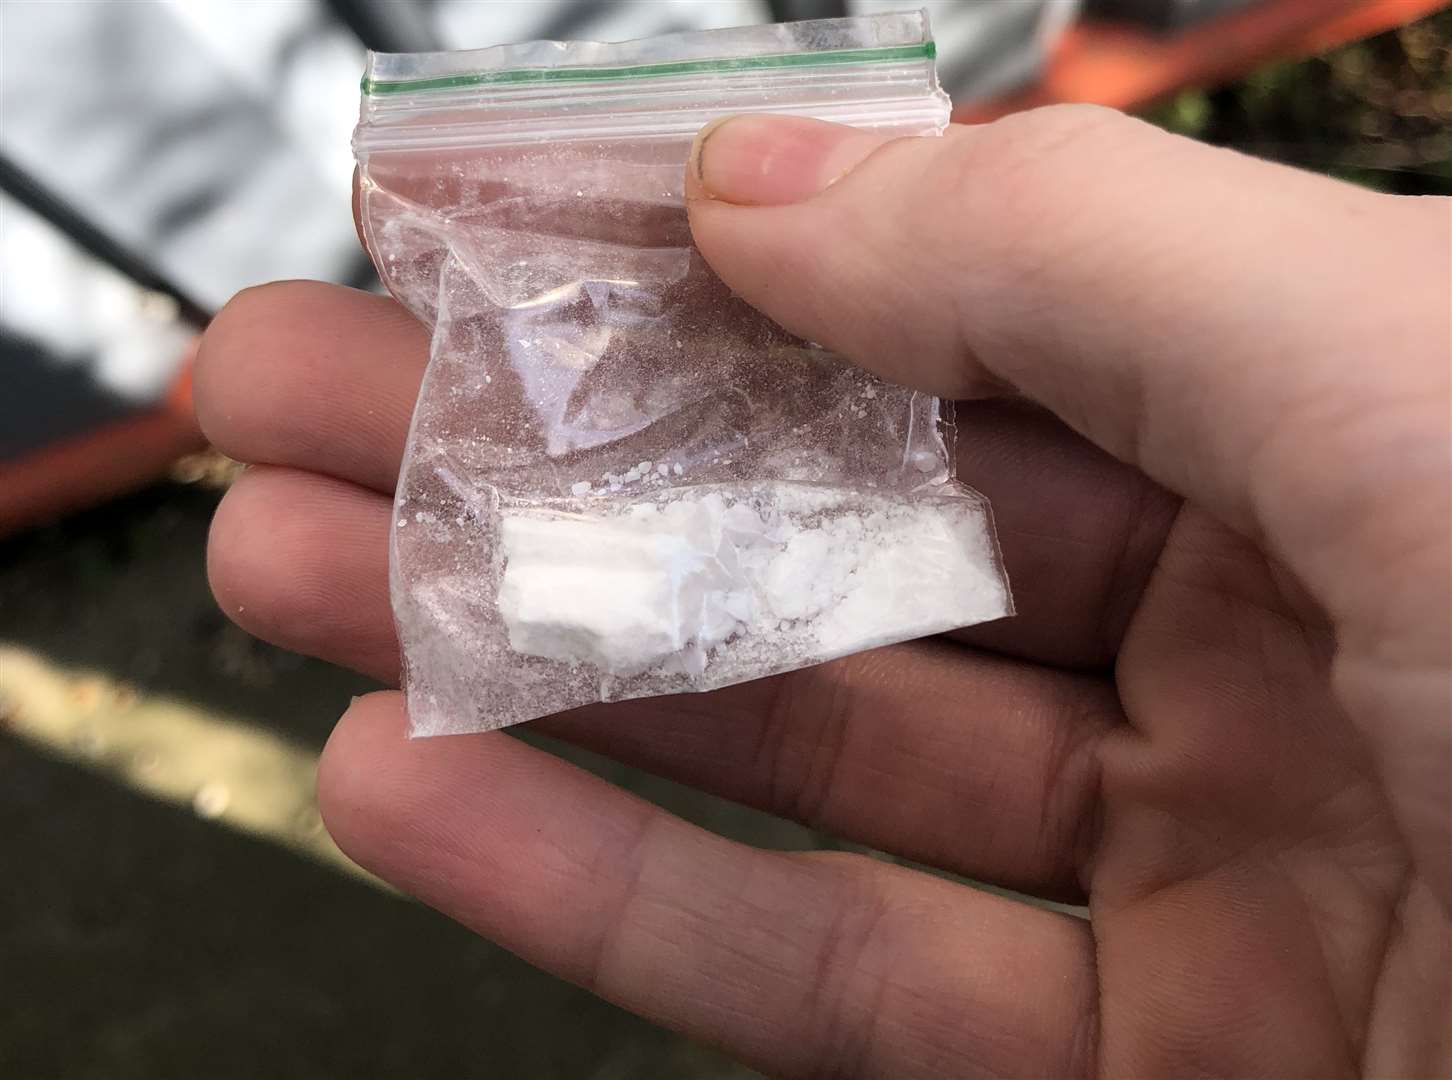 One of the bags of suspected drugs found in Playzone on Wednesday afternoon (8446178)